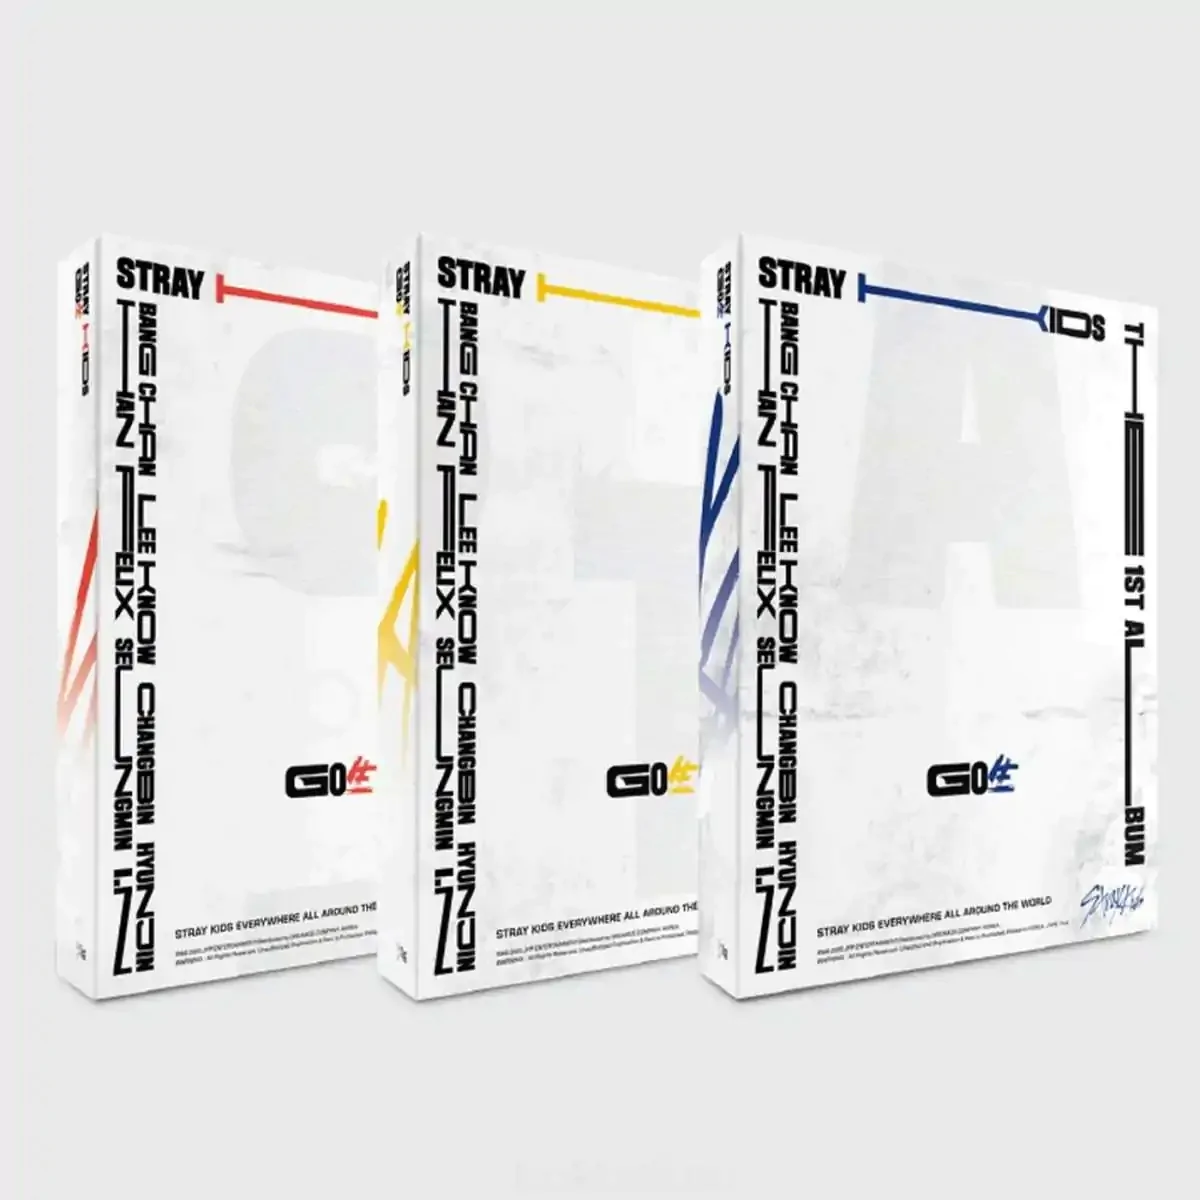 Stray Kids - GO生 Go Live (Normal Edition, A version) (1st Album) 